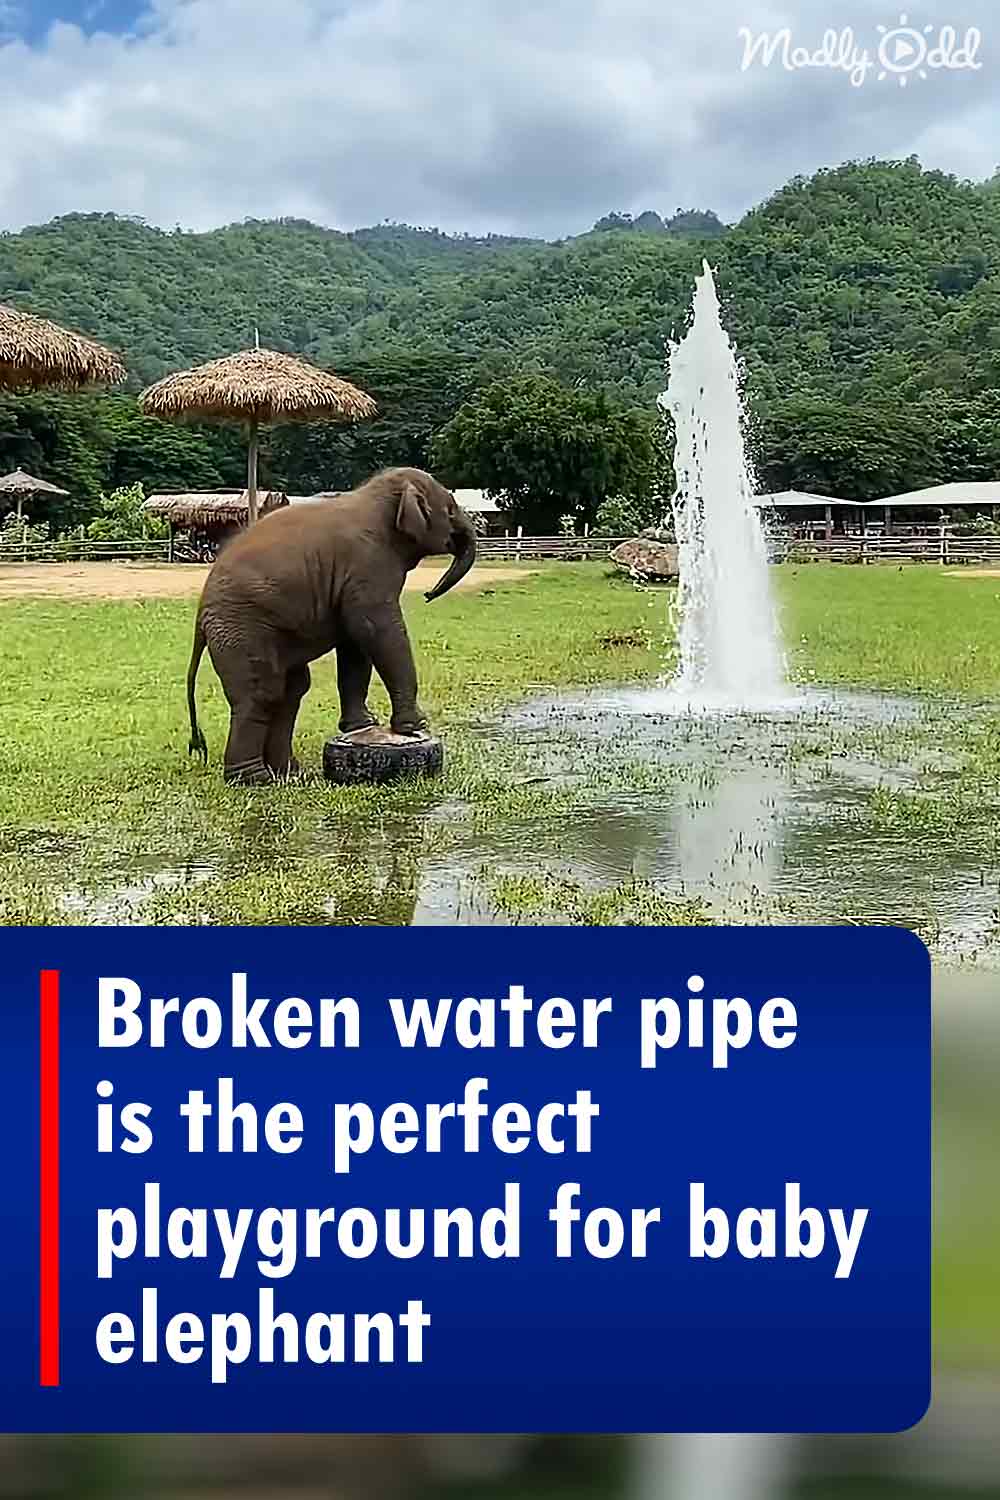 Broken water pipe is the perfect playground for baby elephant